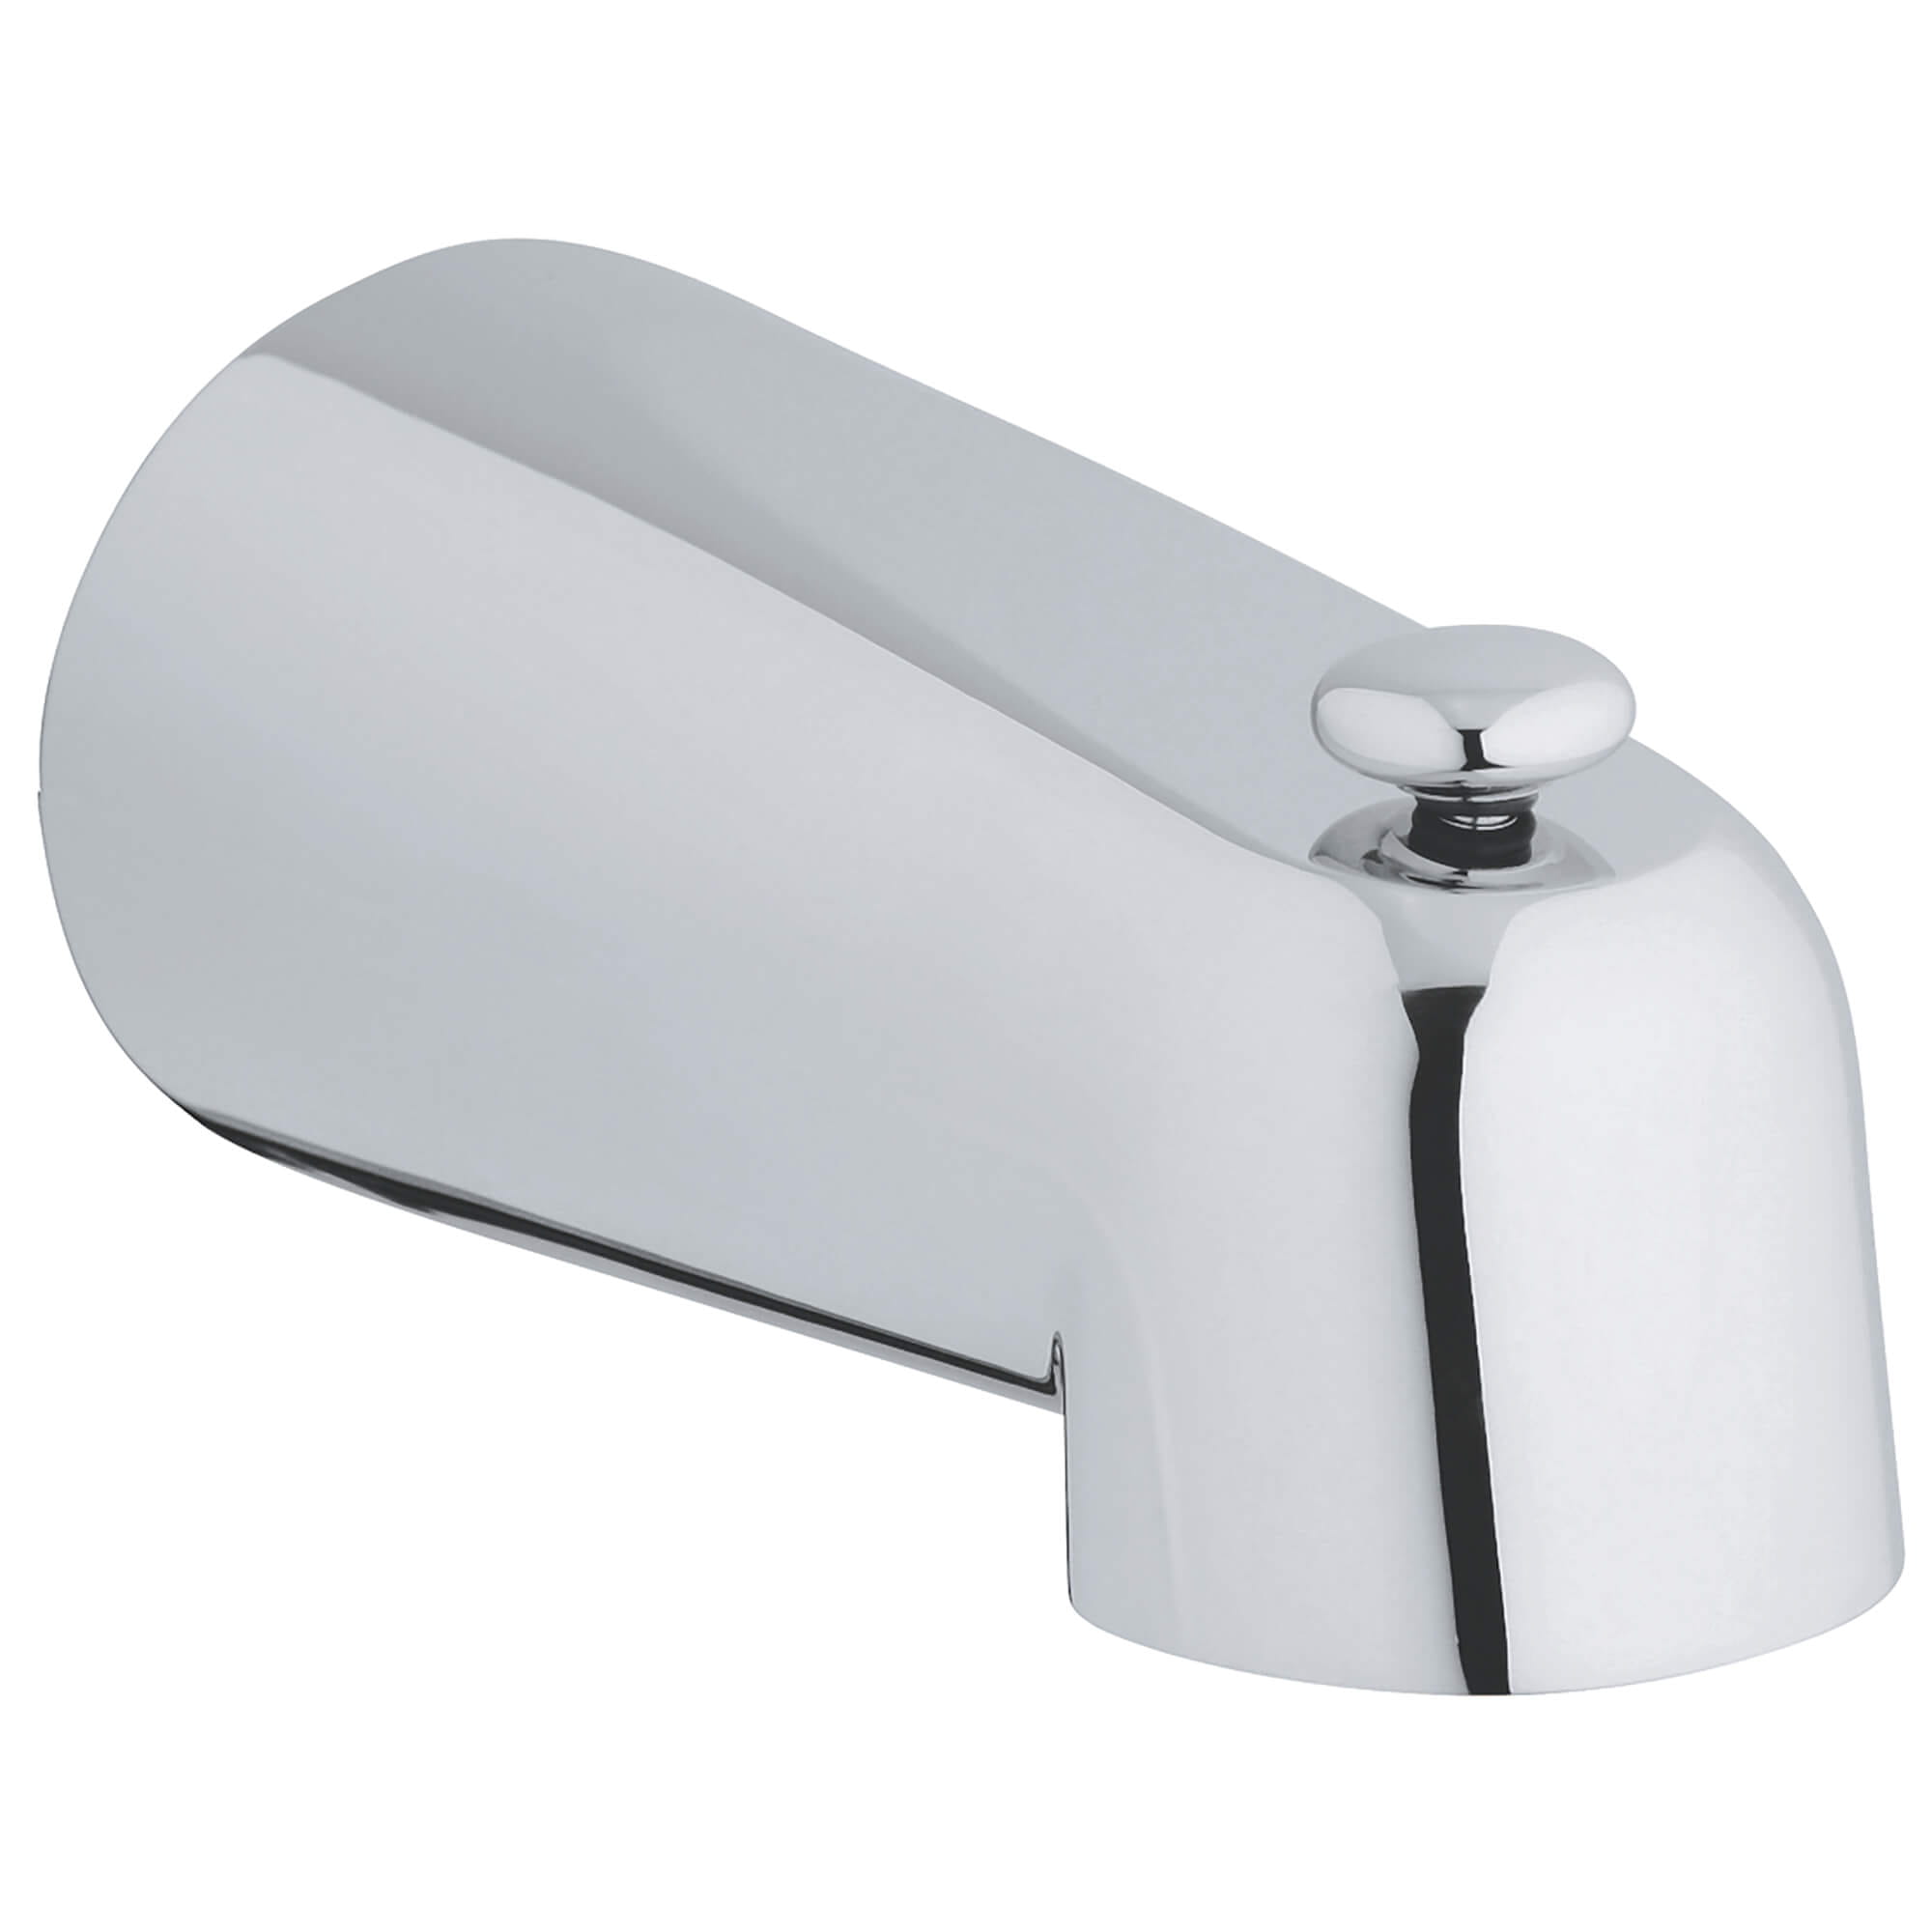 UNIVERSAL (GROHE)  DIVERTER TUB SPOUT Model: 13611000-related